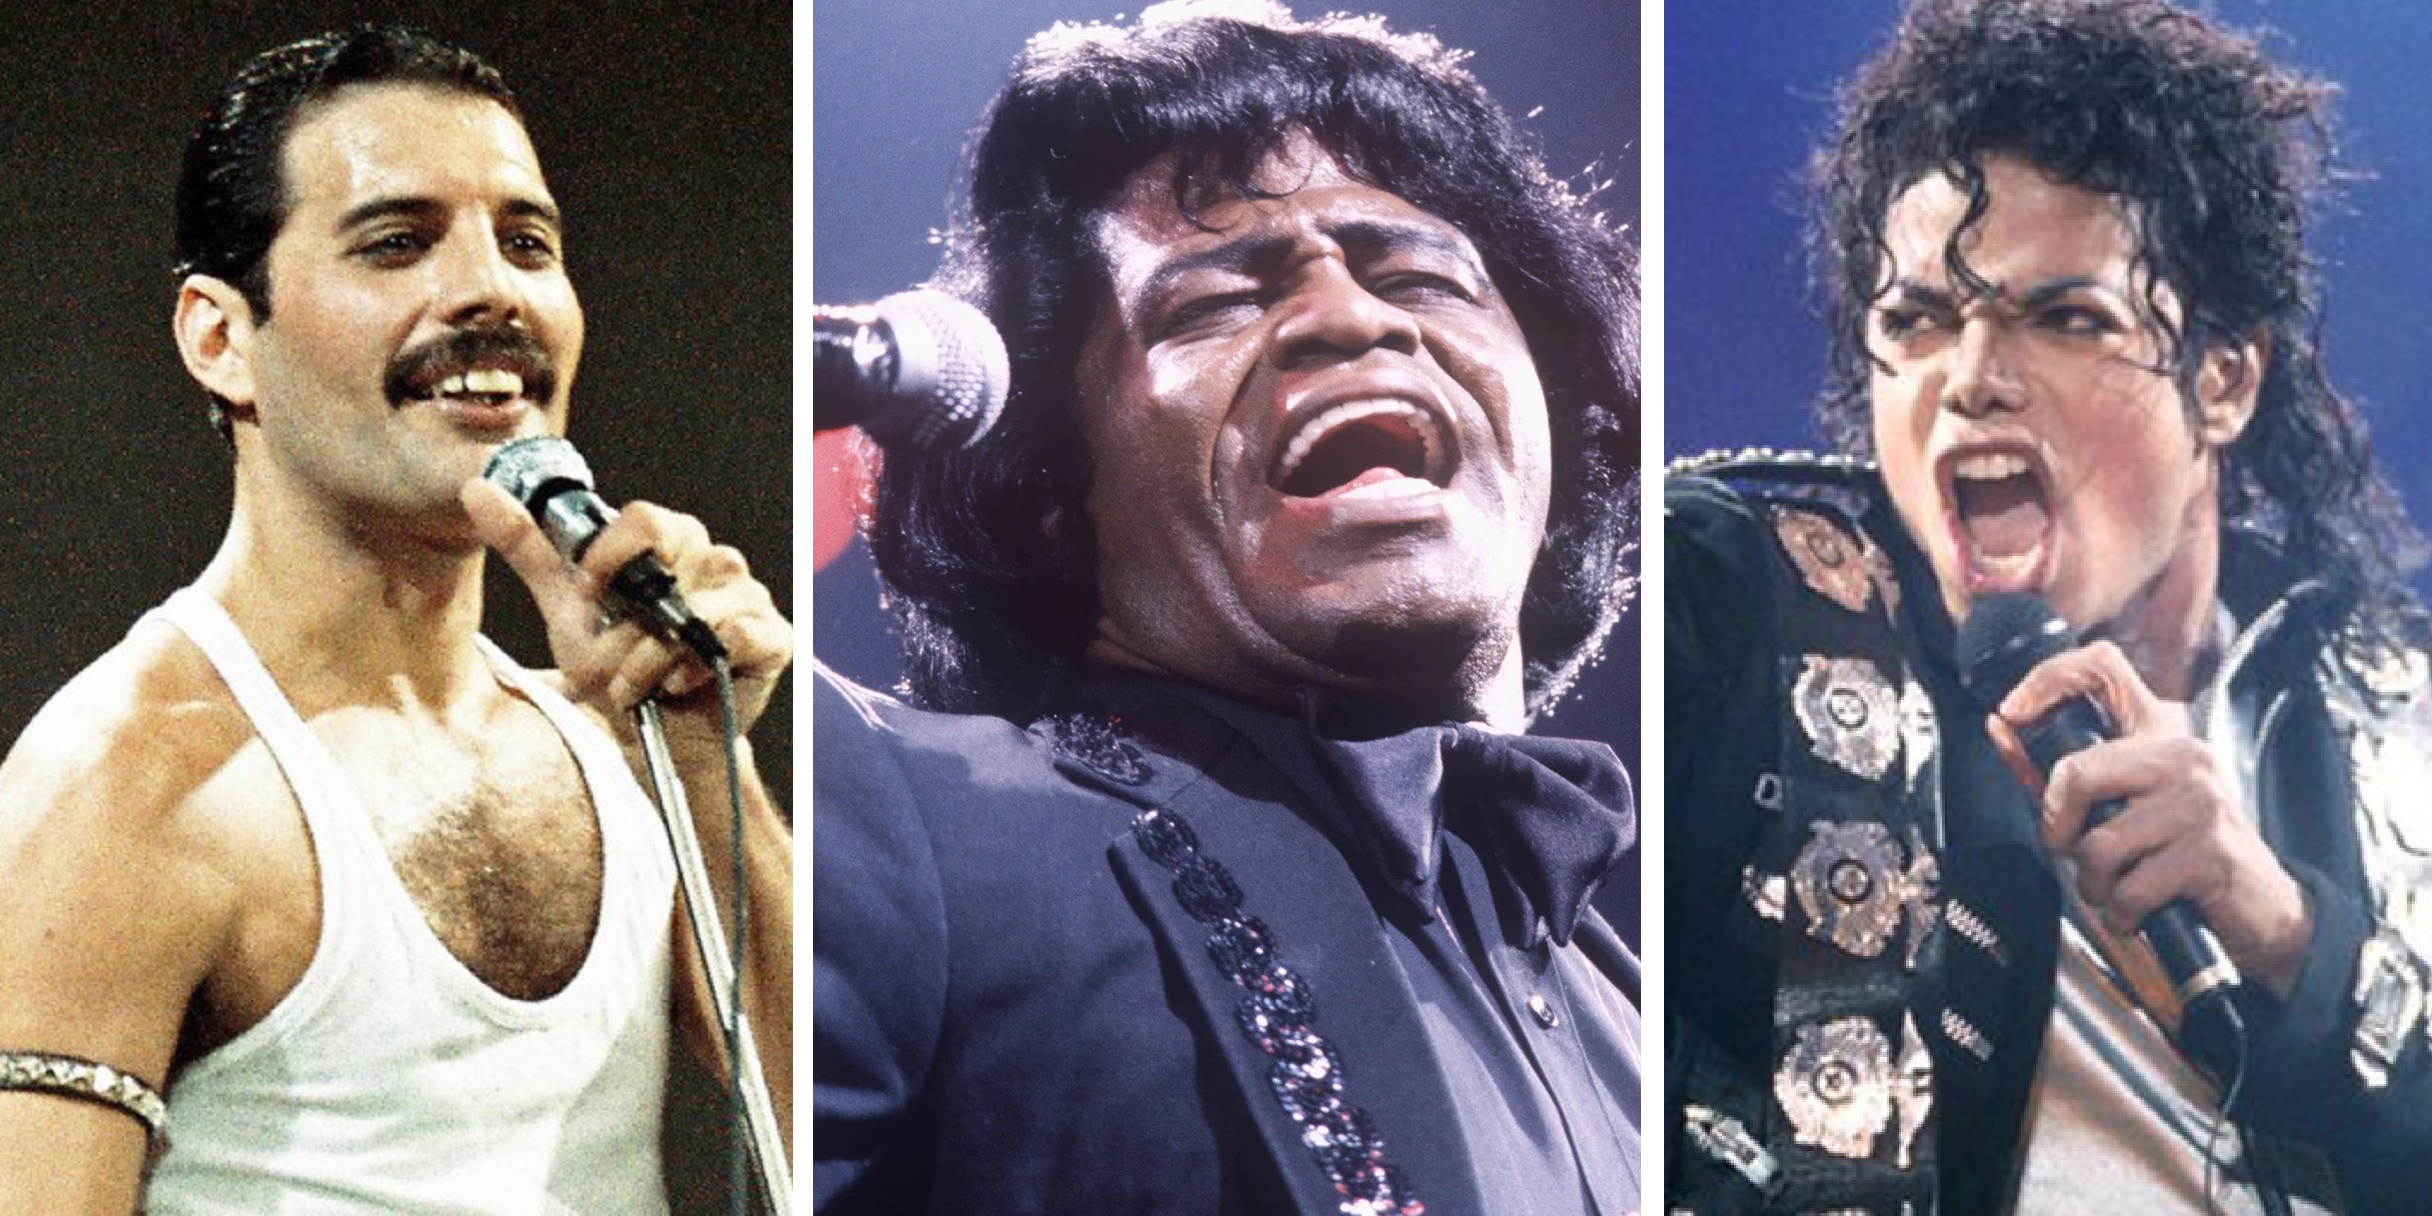 The Top 10 Greatest Male Singers Of All Time